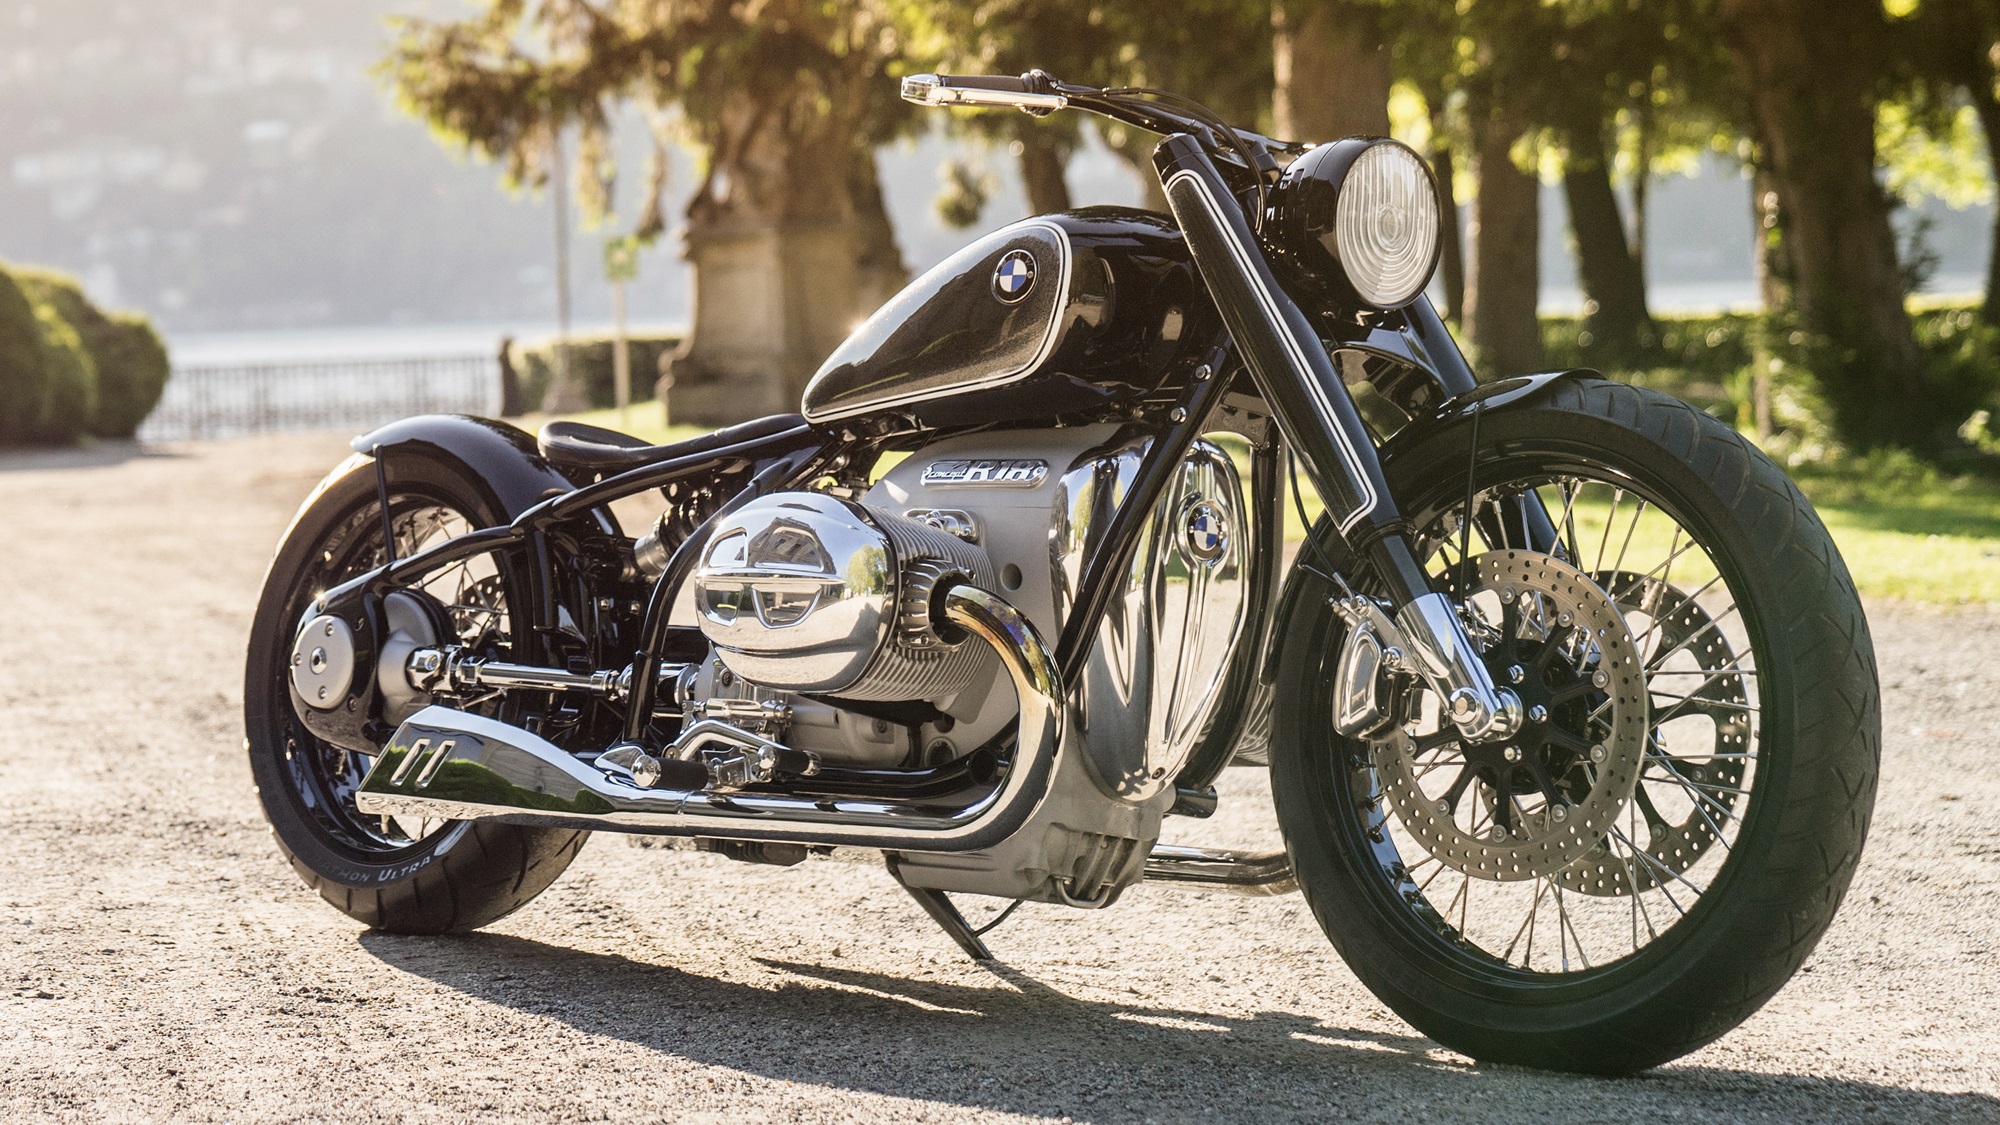 New Bmw Bobber Motorcycle - HD Wallpaper 